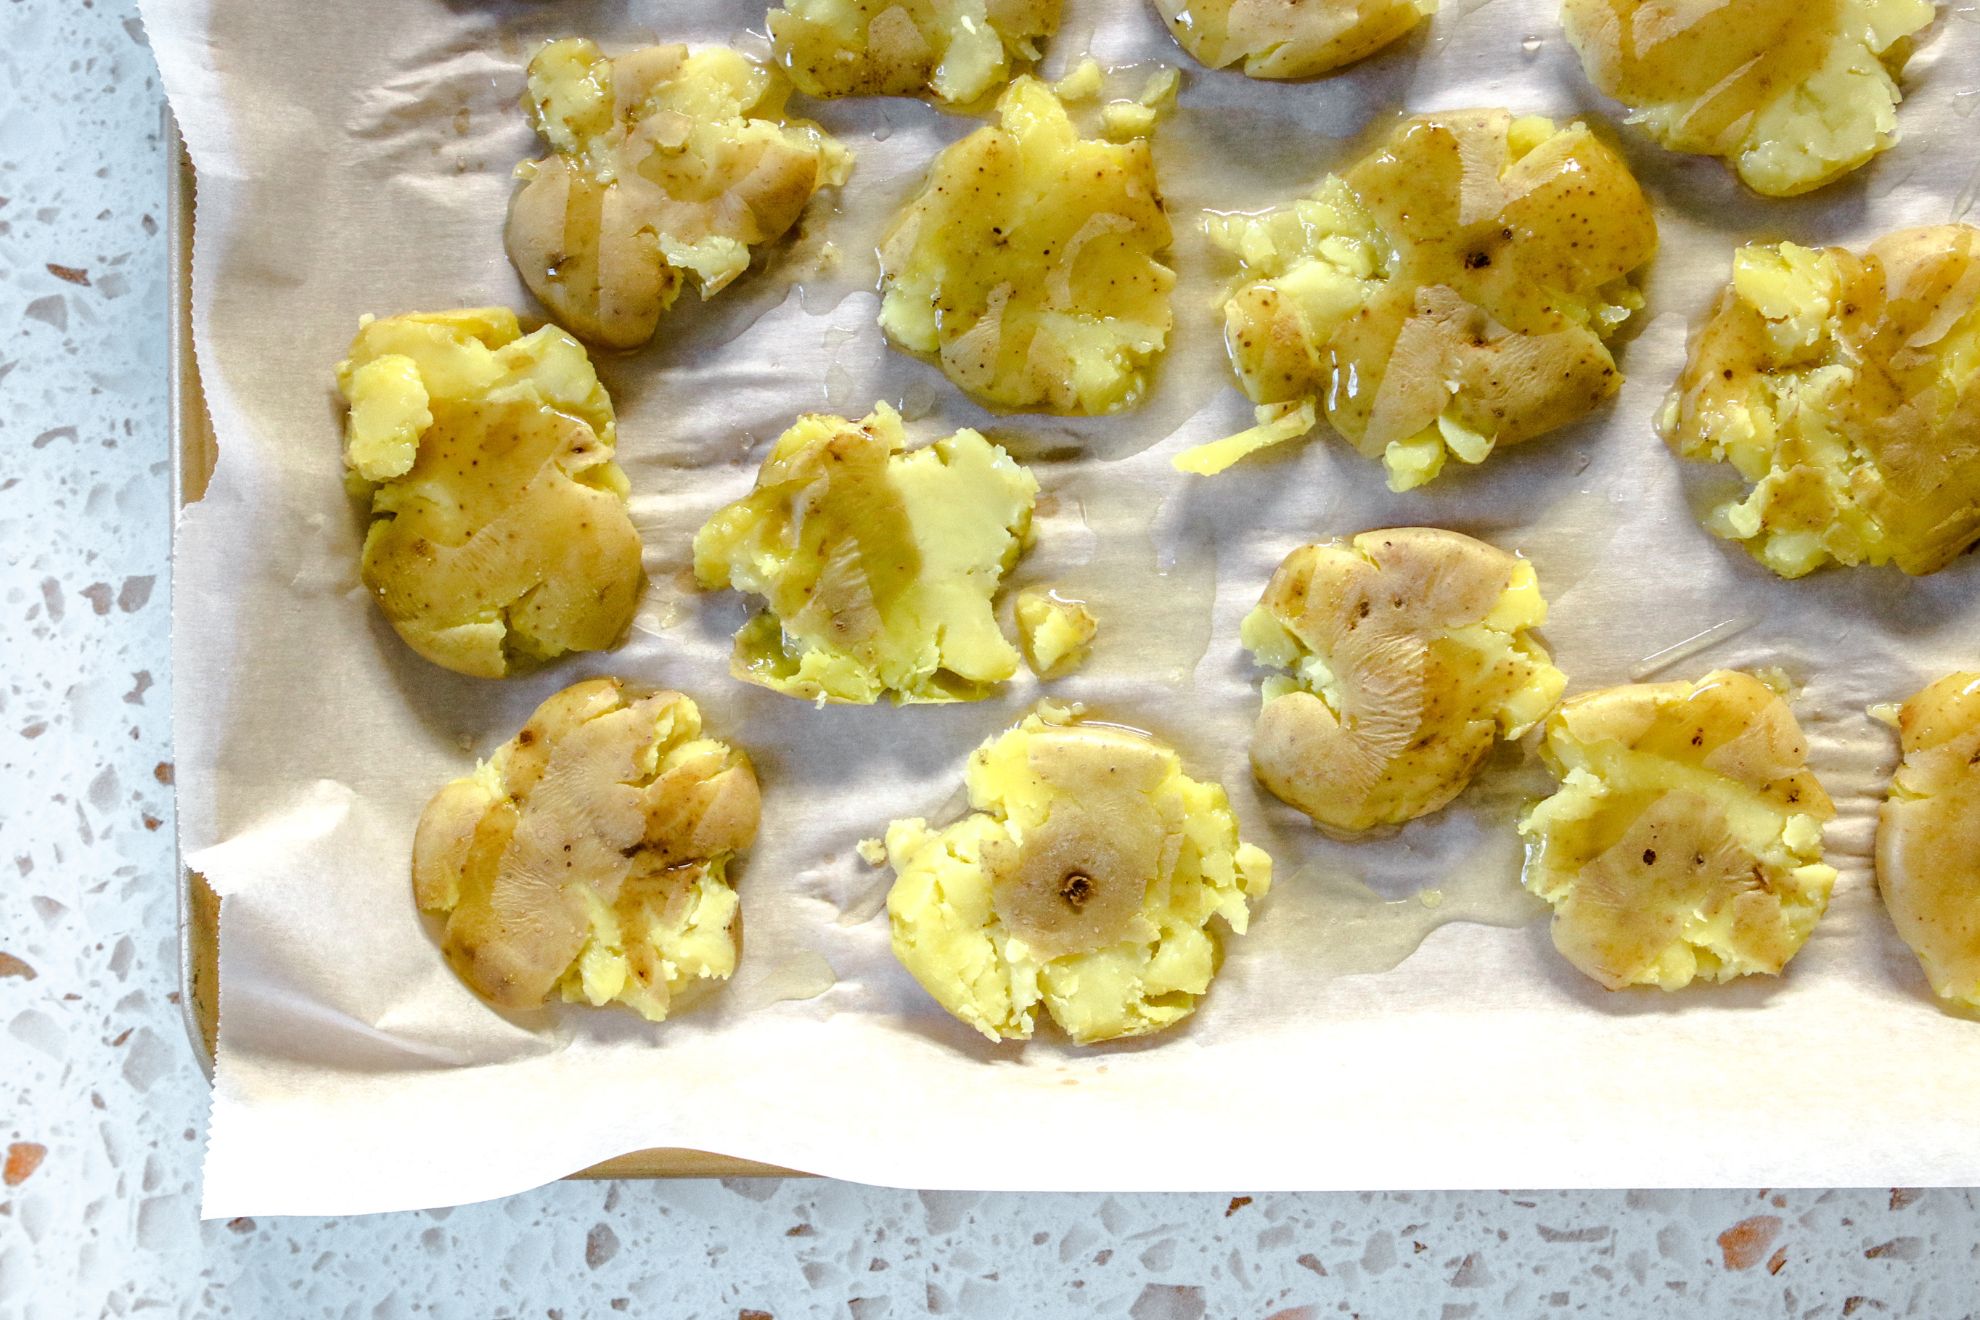 This is an overhead horizontal view of a gold rimmed baking sheet lined with parchment paper. On the baking sheet are smashed potatoes drizzled with oil. The baking sheet sits on a white terrazzo surface.